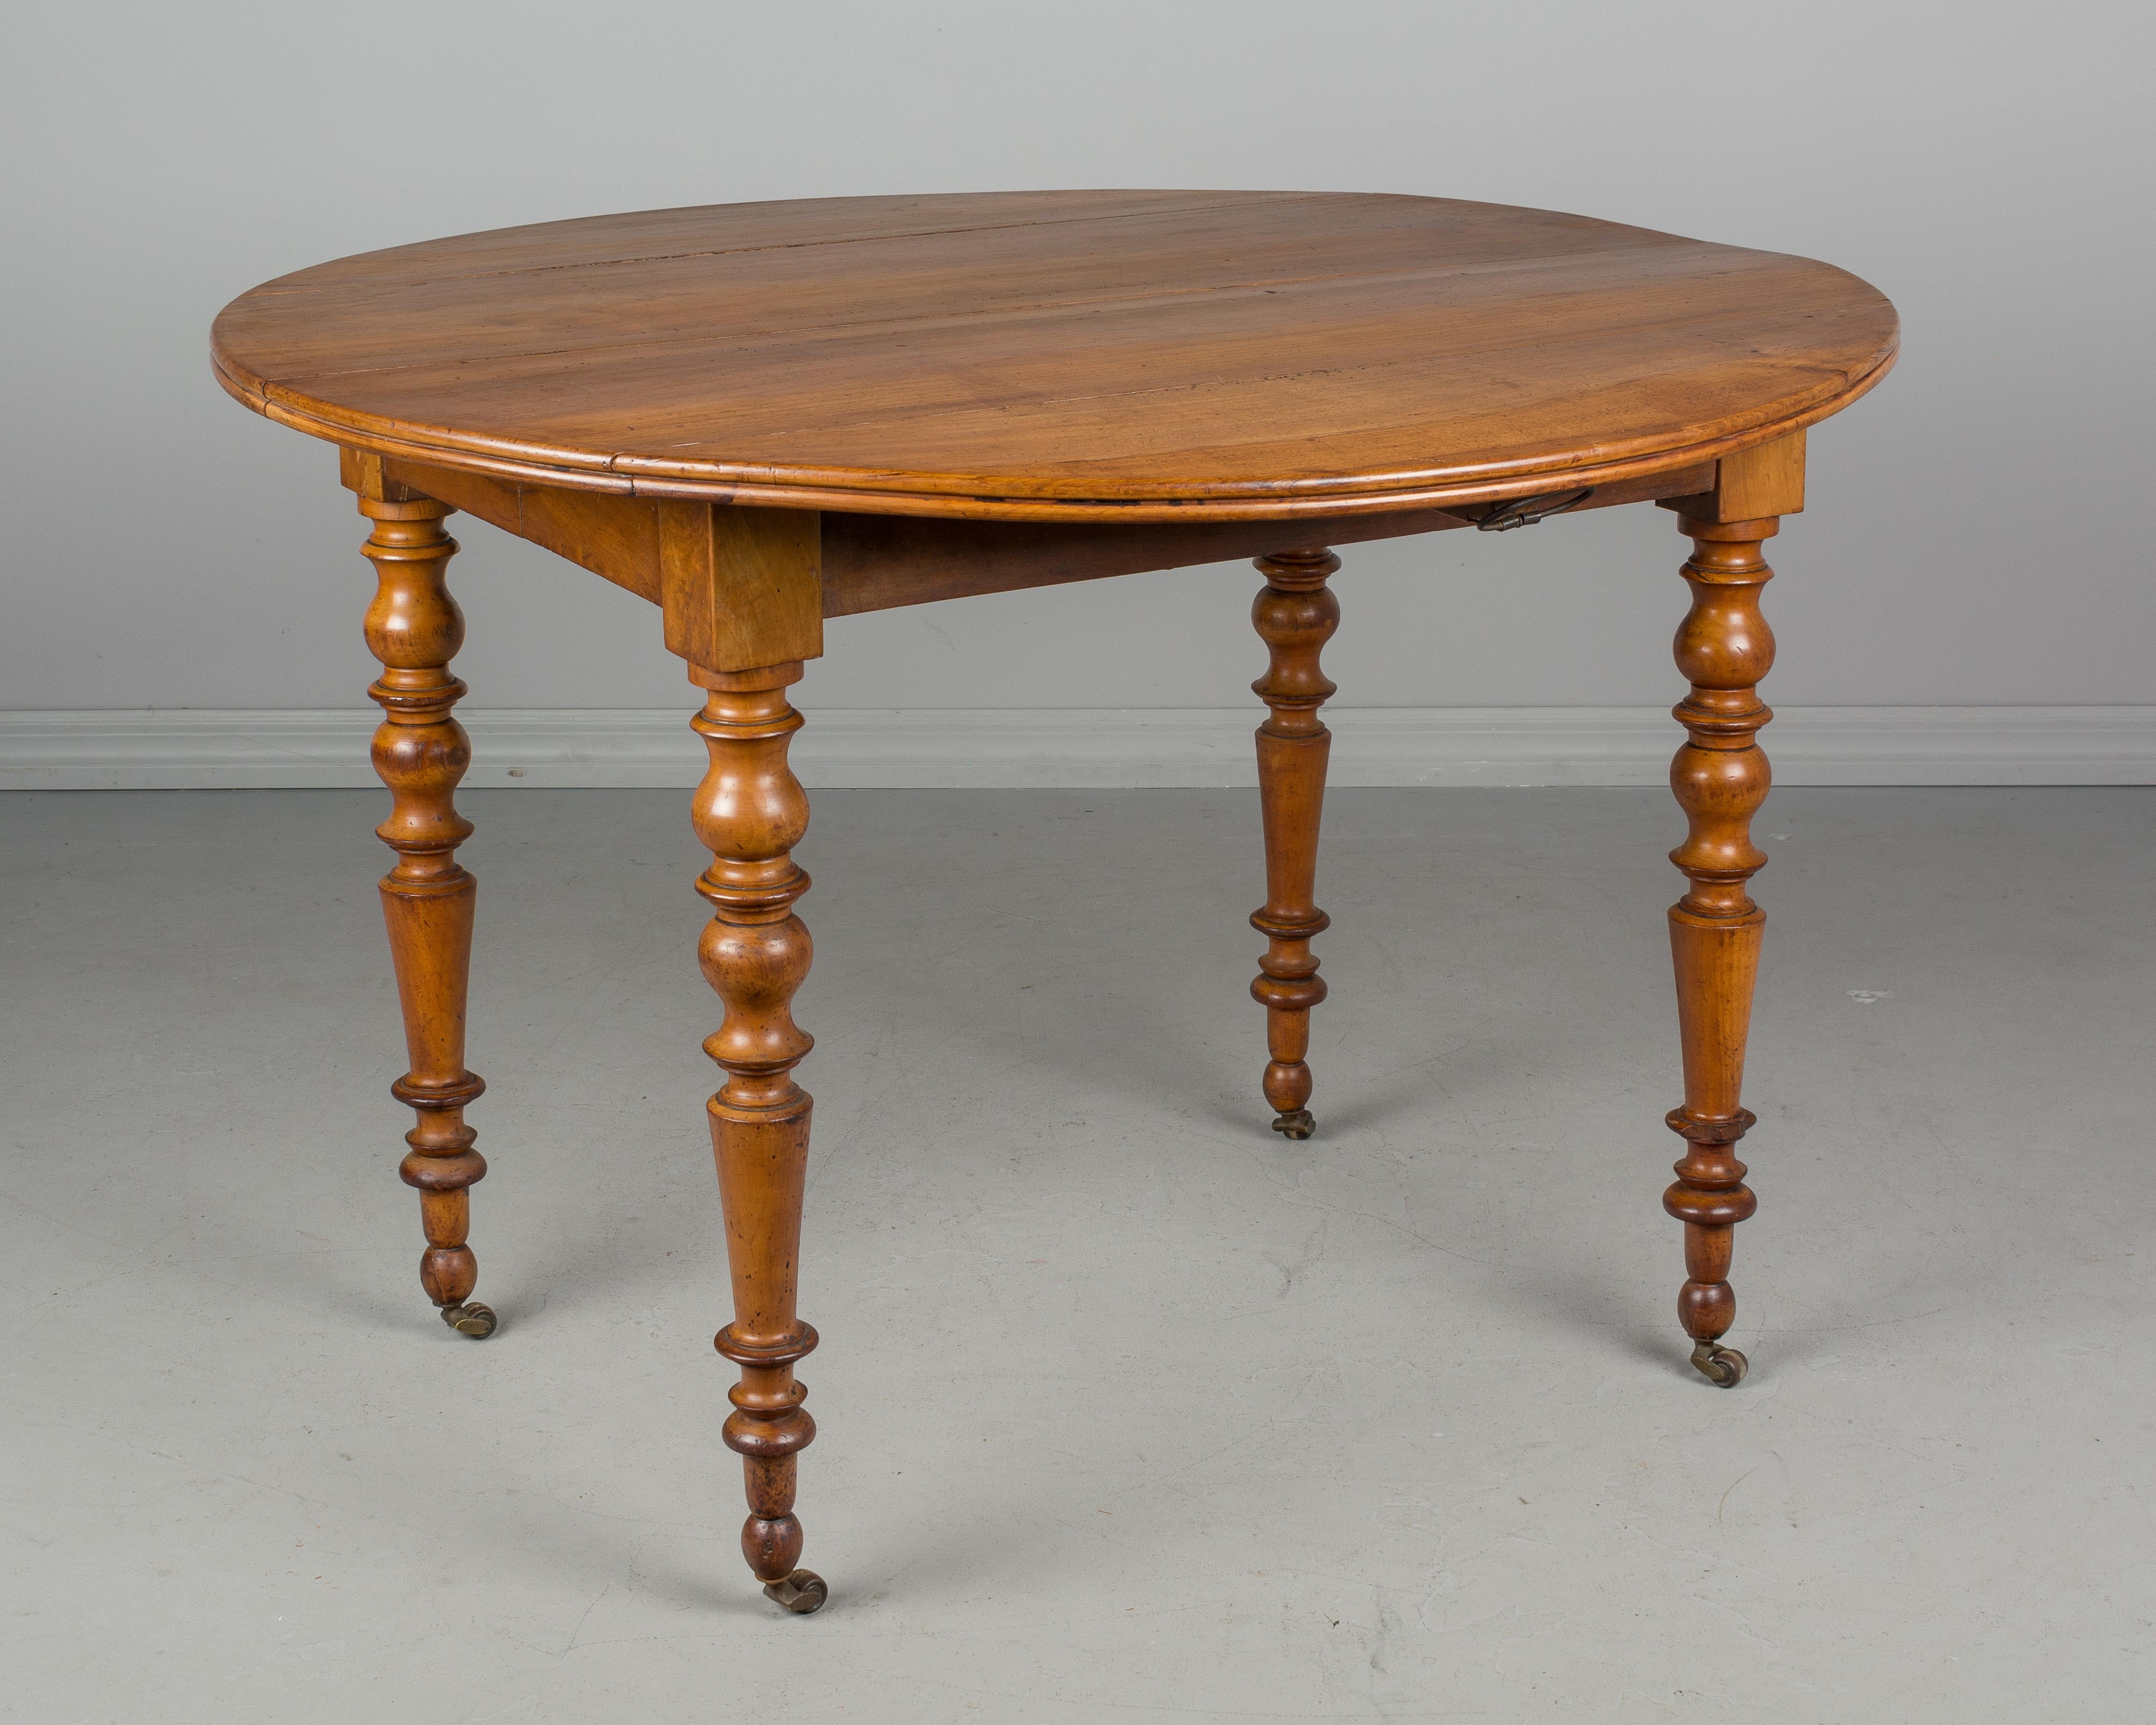 20th Century French Drop-Leaf Dining Table